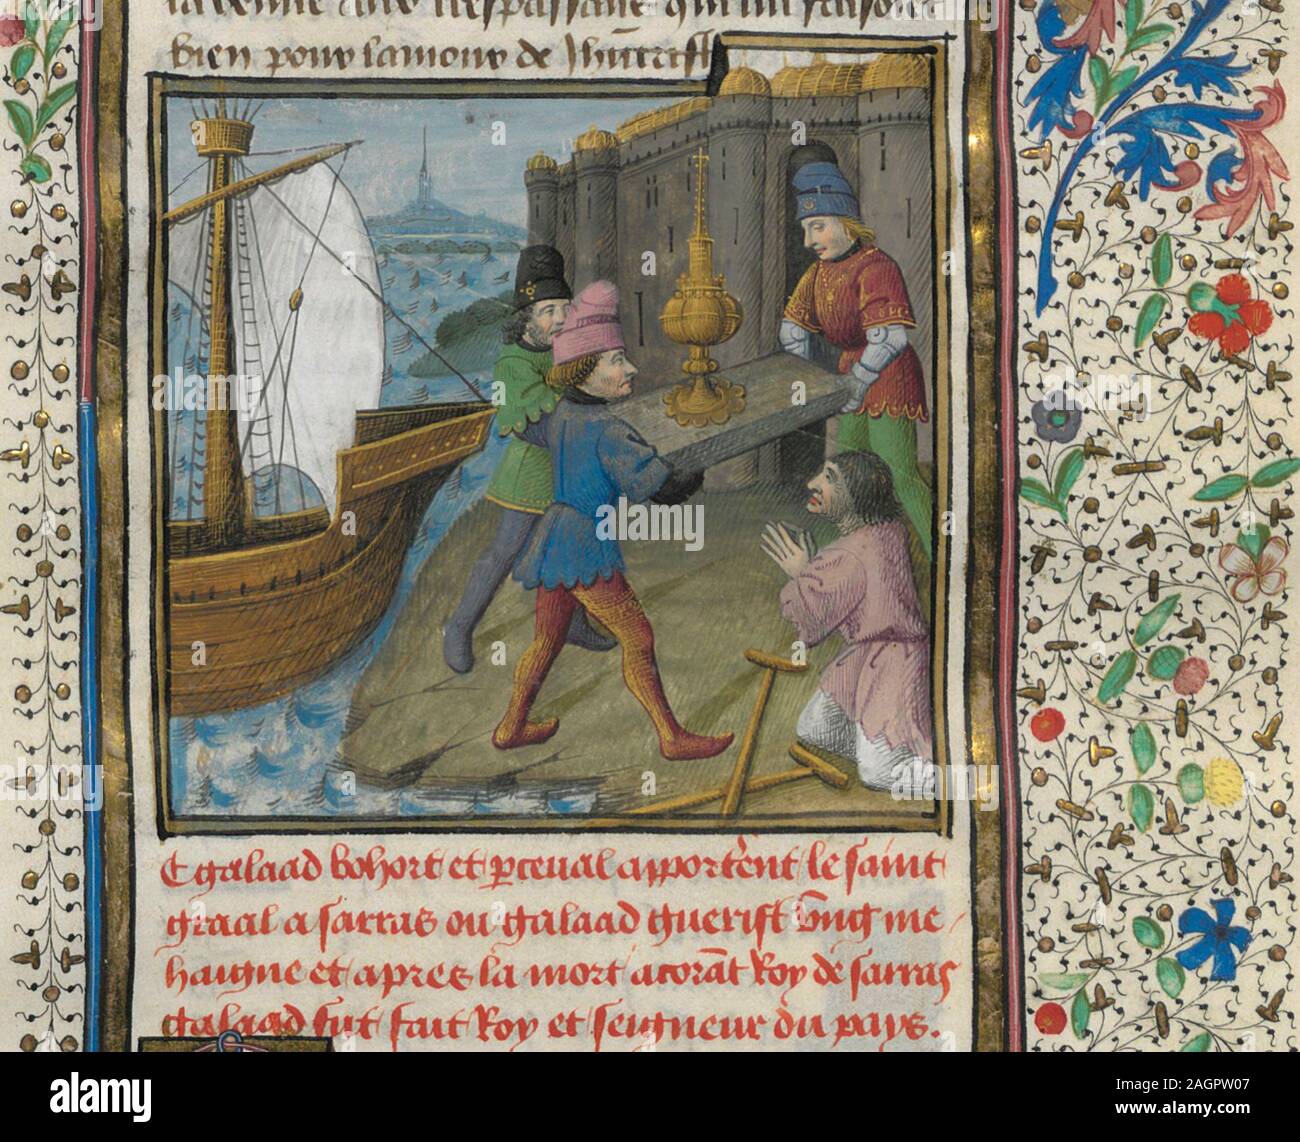 The three Grail Knights brings the Holy Grail to the Ship of Solomon. From: Lancelot en prose. Museum: BIBLIOTHEQUE NATIONALE DE FRANCE. Author: Évrard d'Espinques. Stock Photo